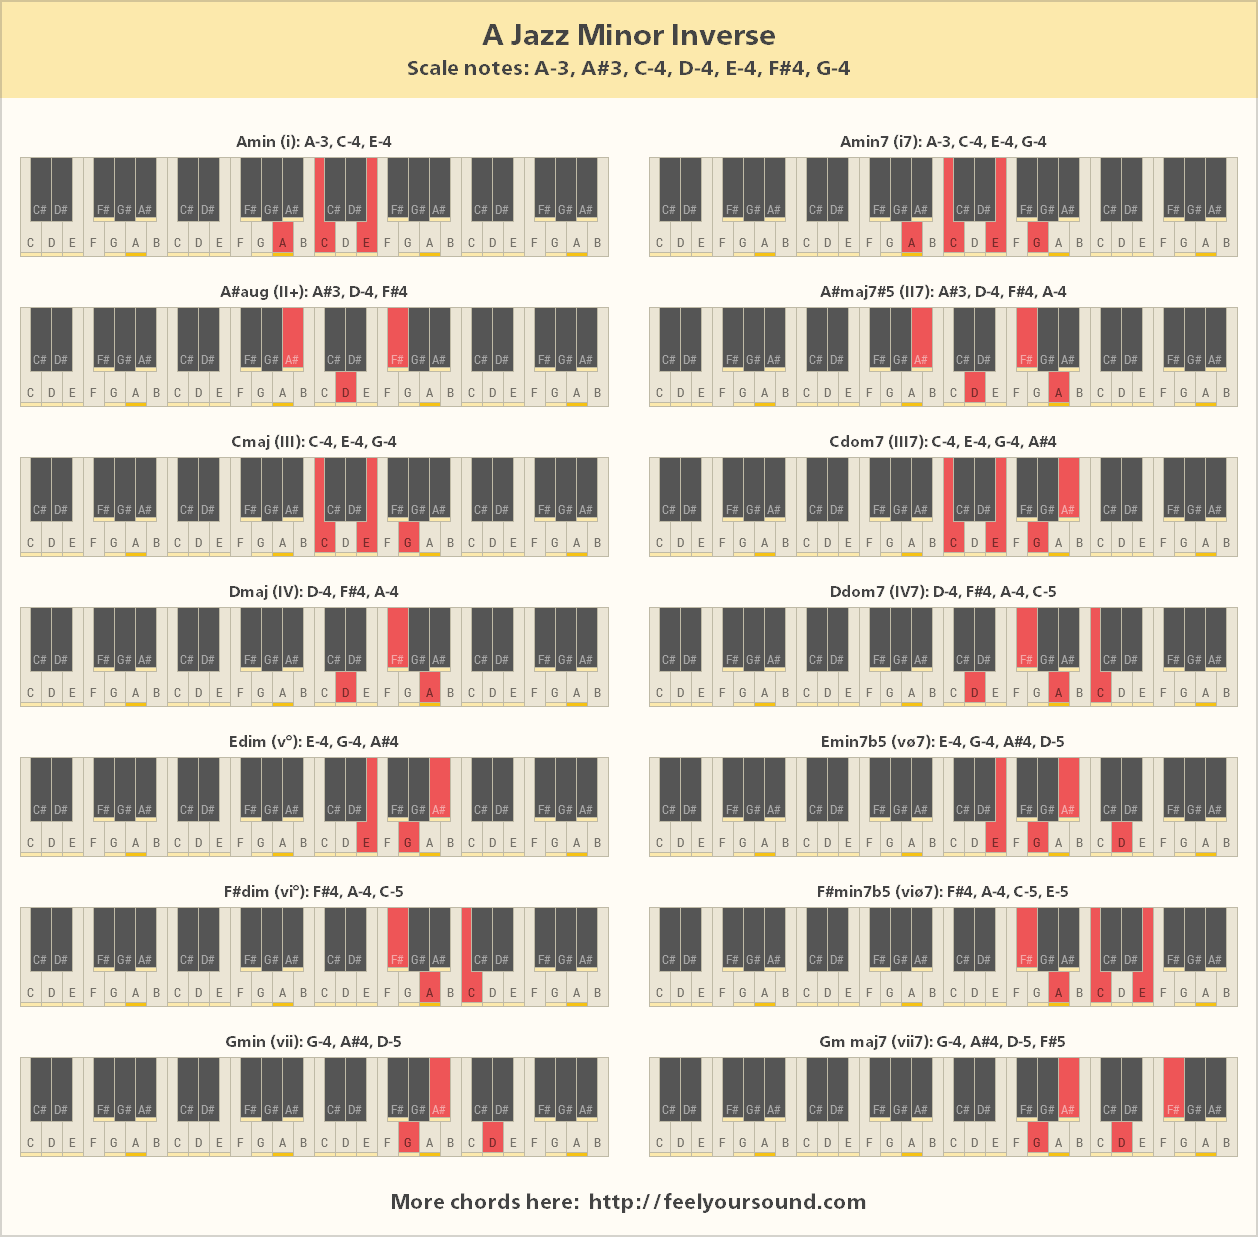 All important chords of A Jazz Minor Inverse